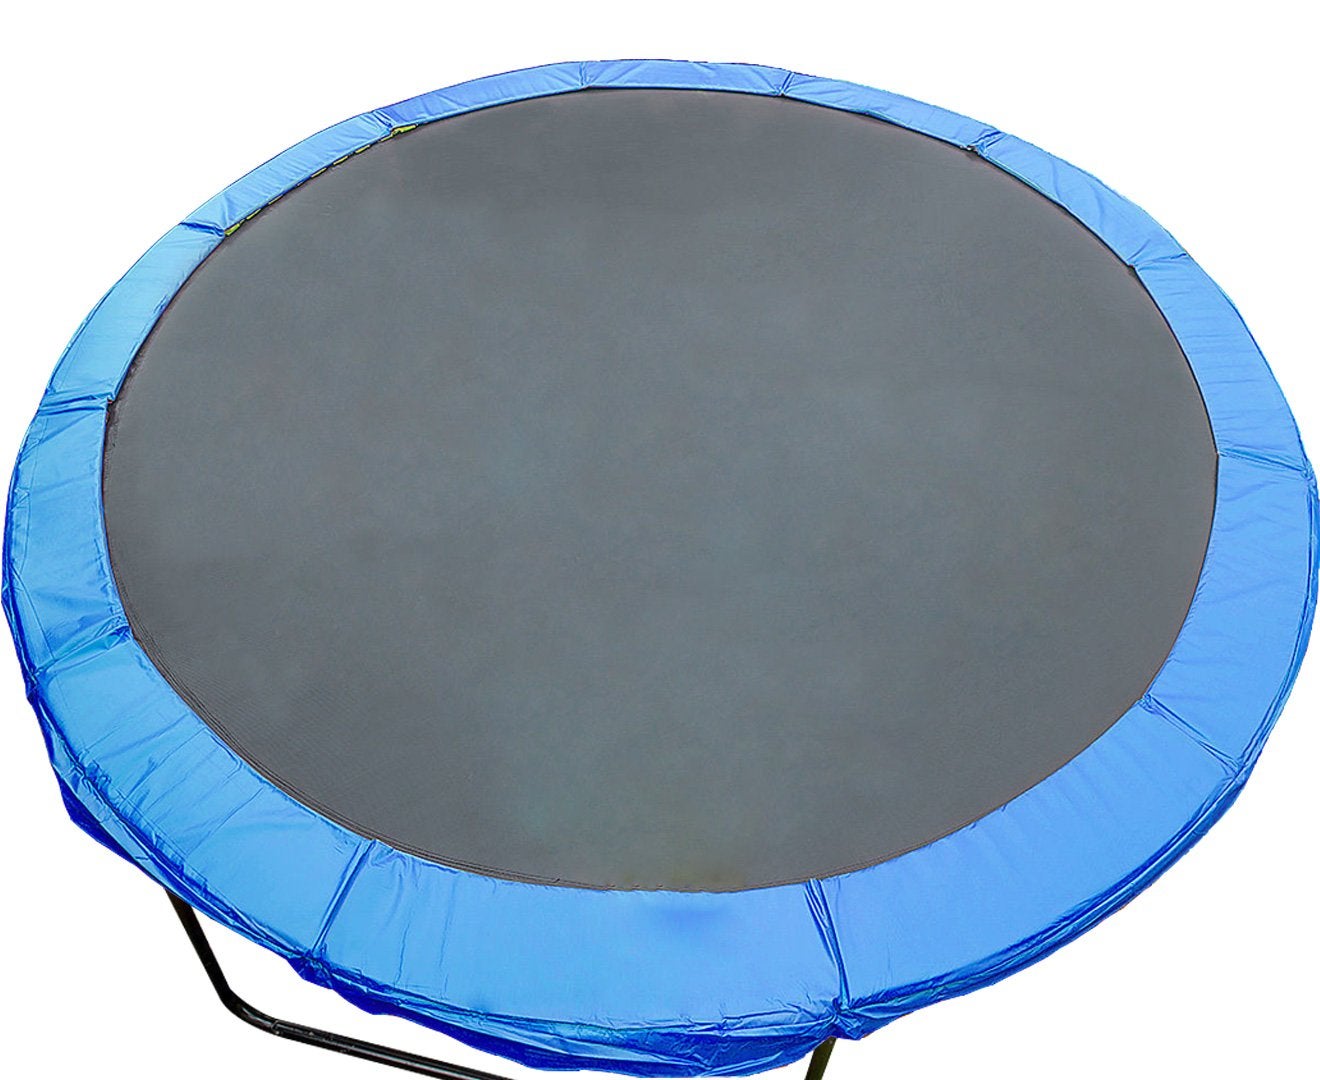 New 8ft Replacement Reinforced Outdoor Round Trampoline Safety Spring Pad Cover